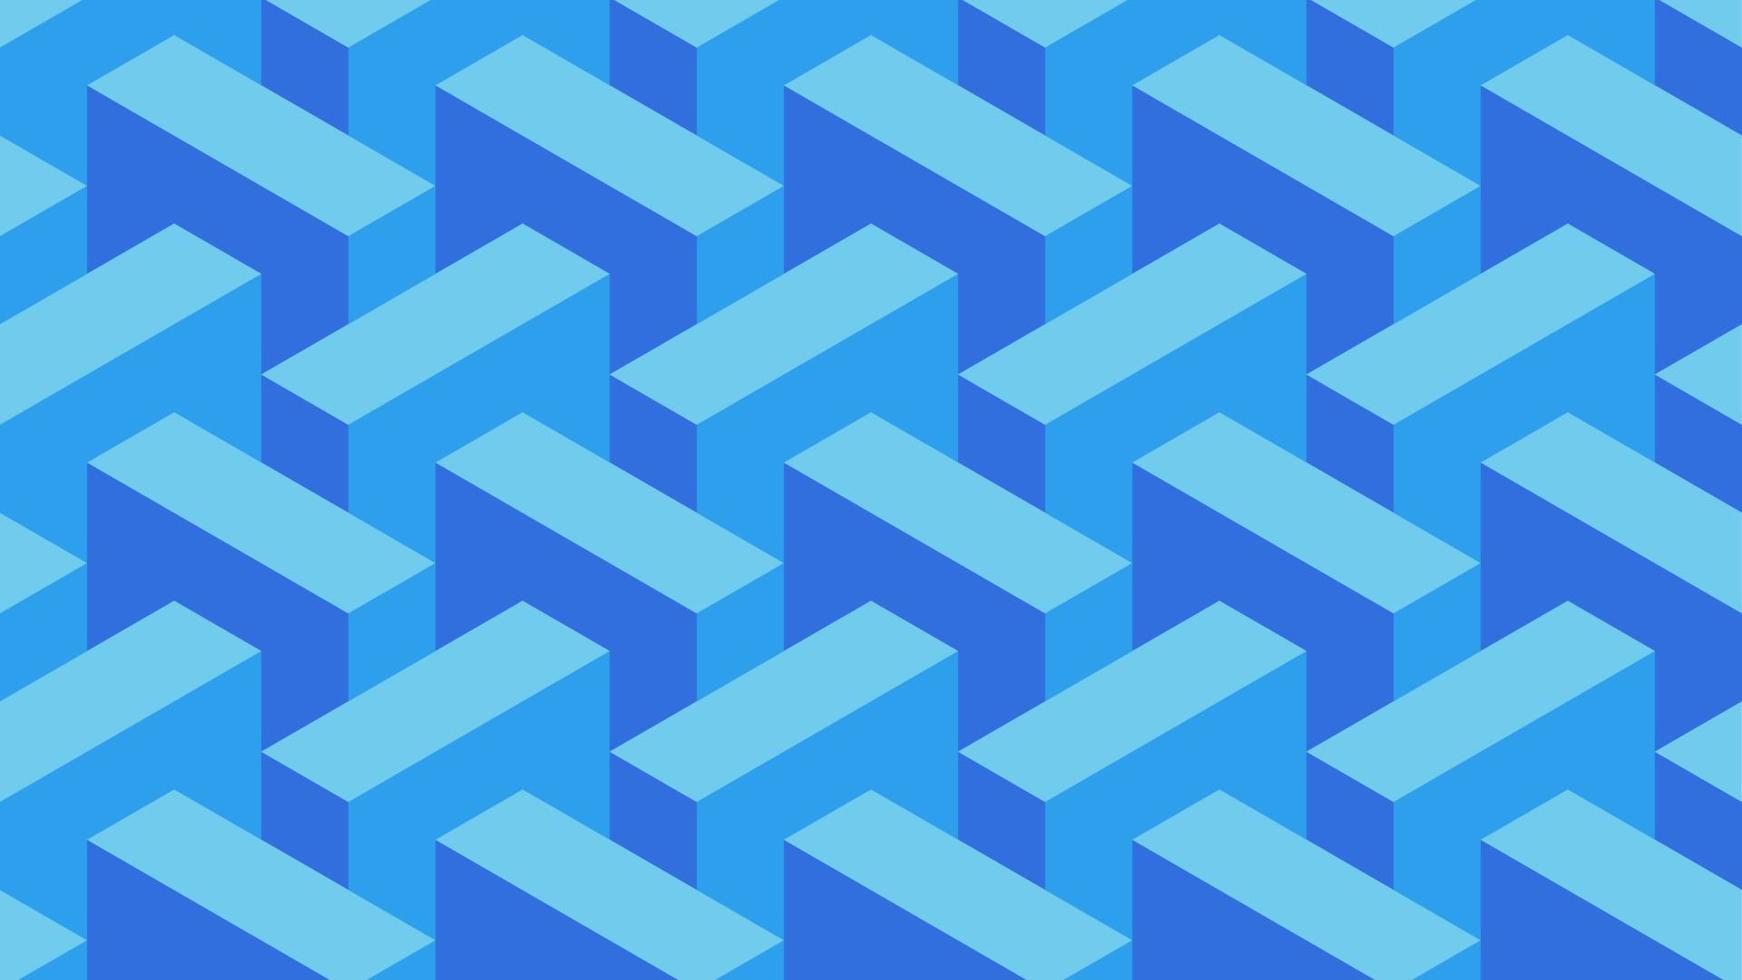 Pattern of 3d optical illusion. Pattern of illusion block. Vector illustration of 3d blue blocks. Geometric illusive for design graphic, background, wallpaper, layout or art